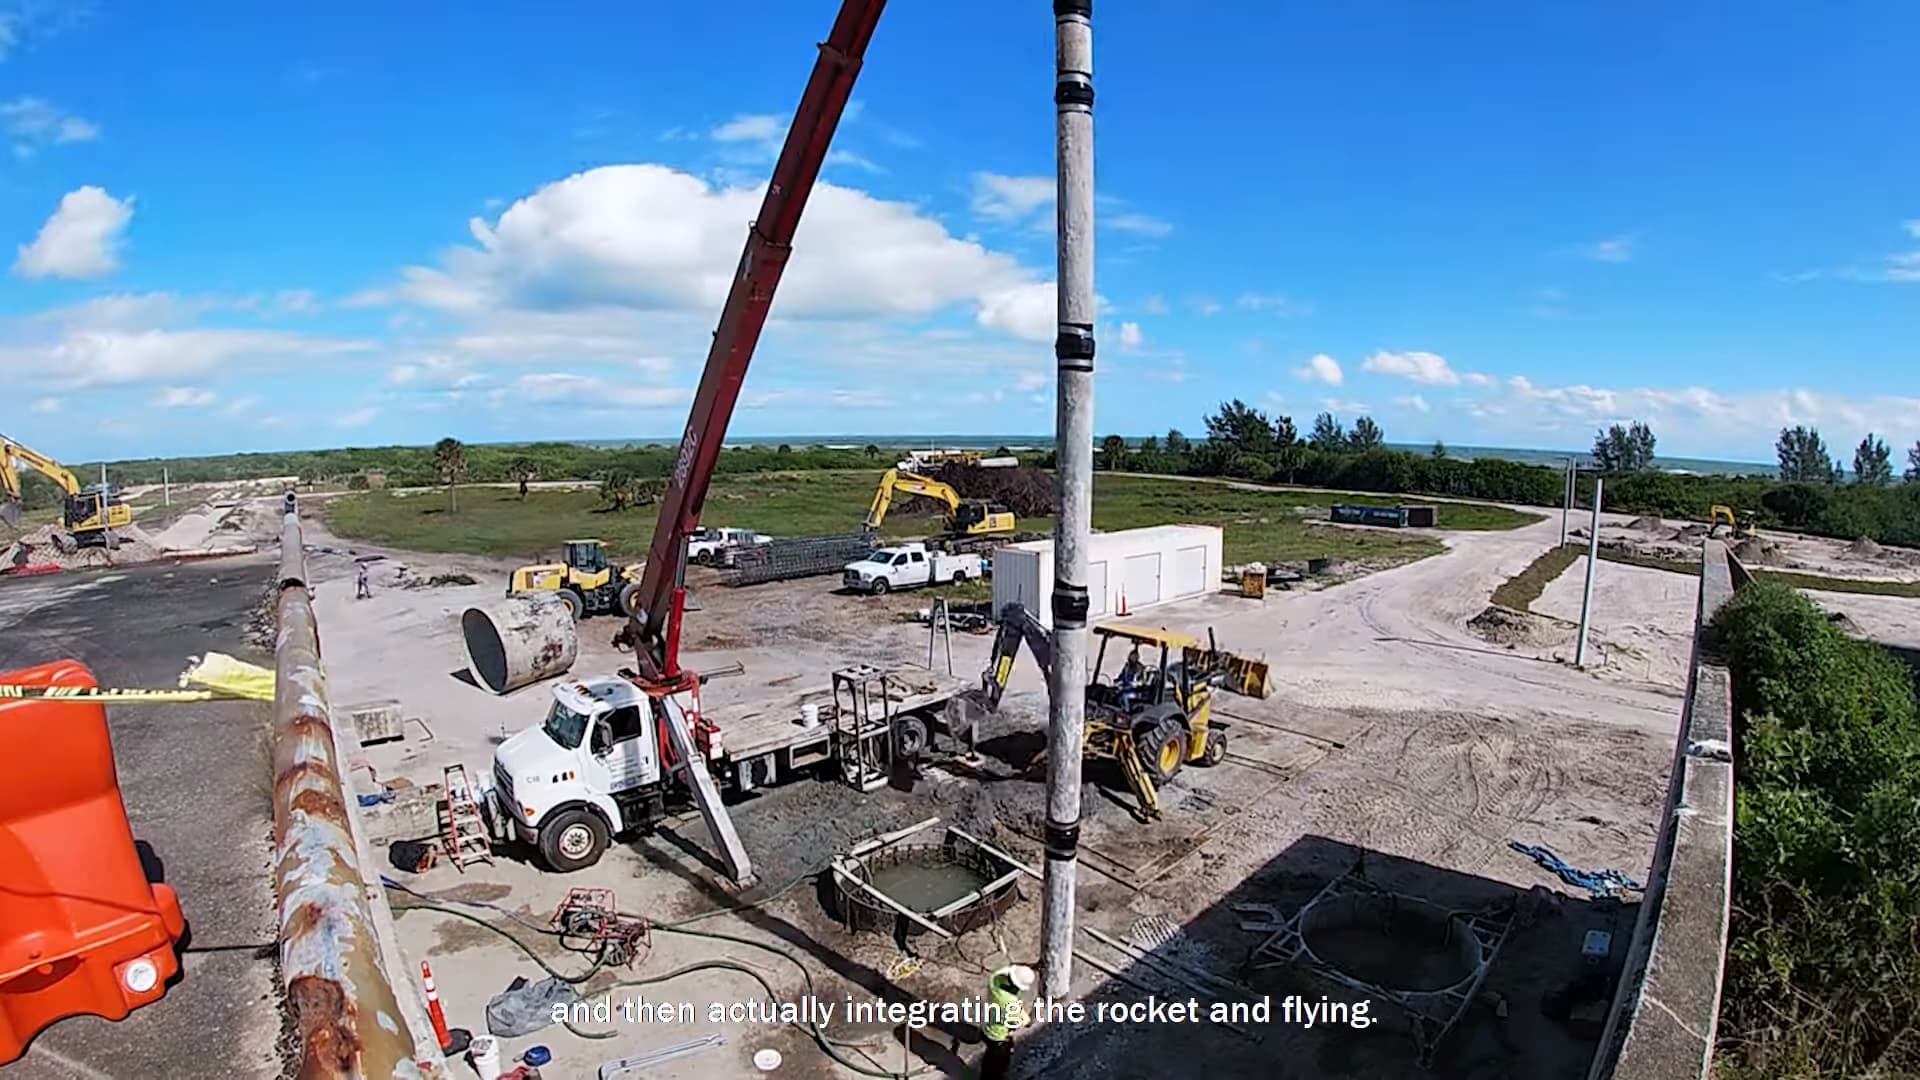 Construction underway on the company's launchpad at LC-16 in Cape Canaveral, Florida.